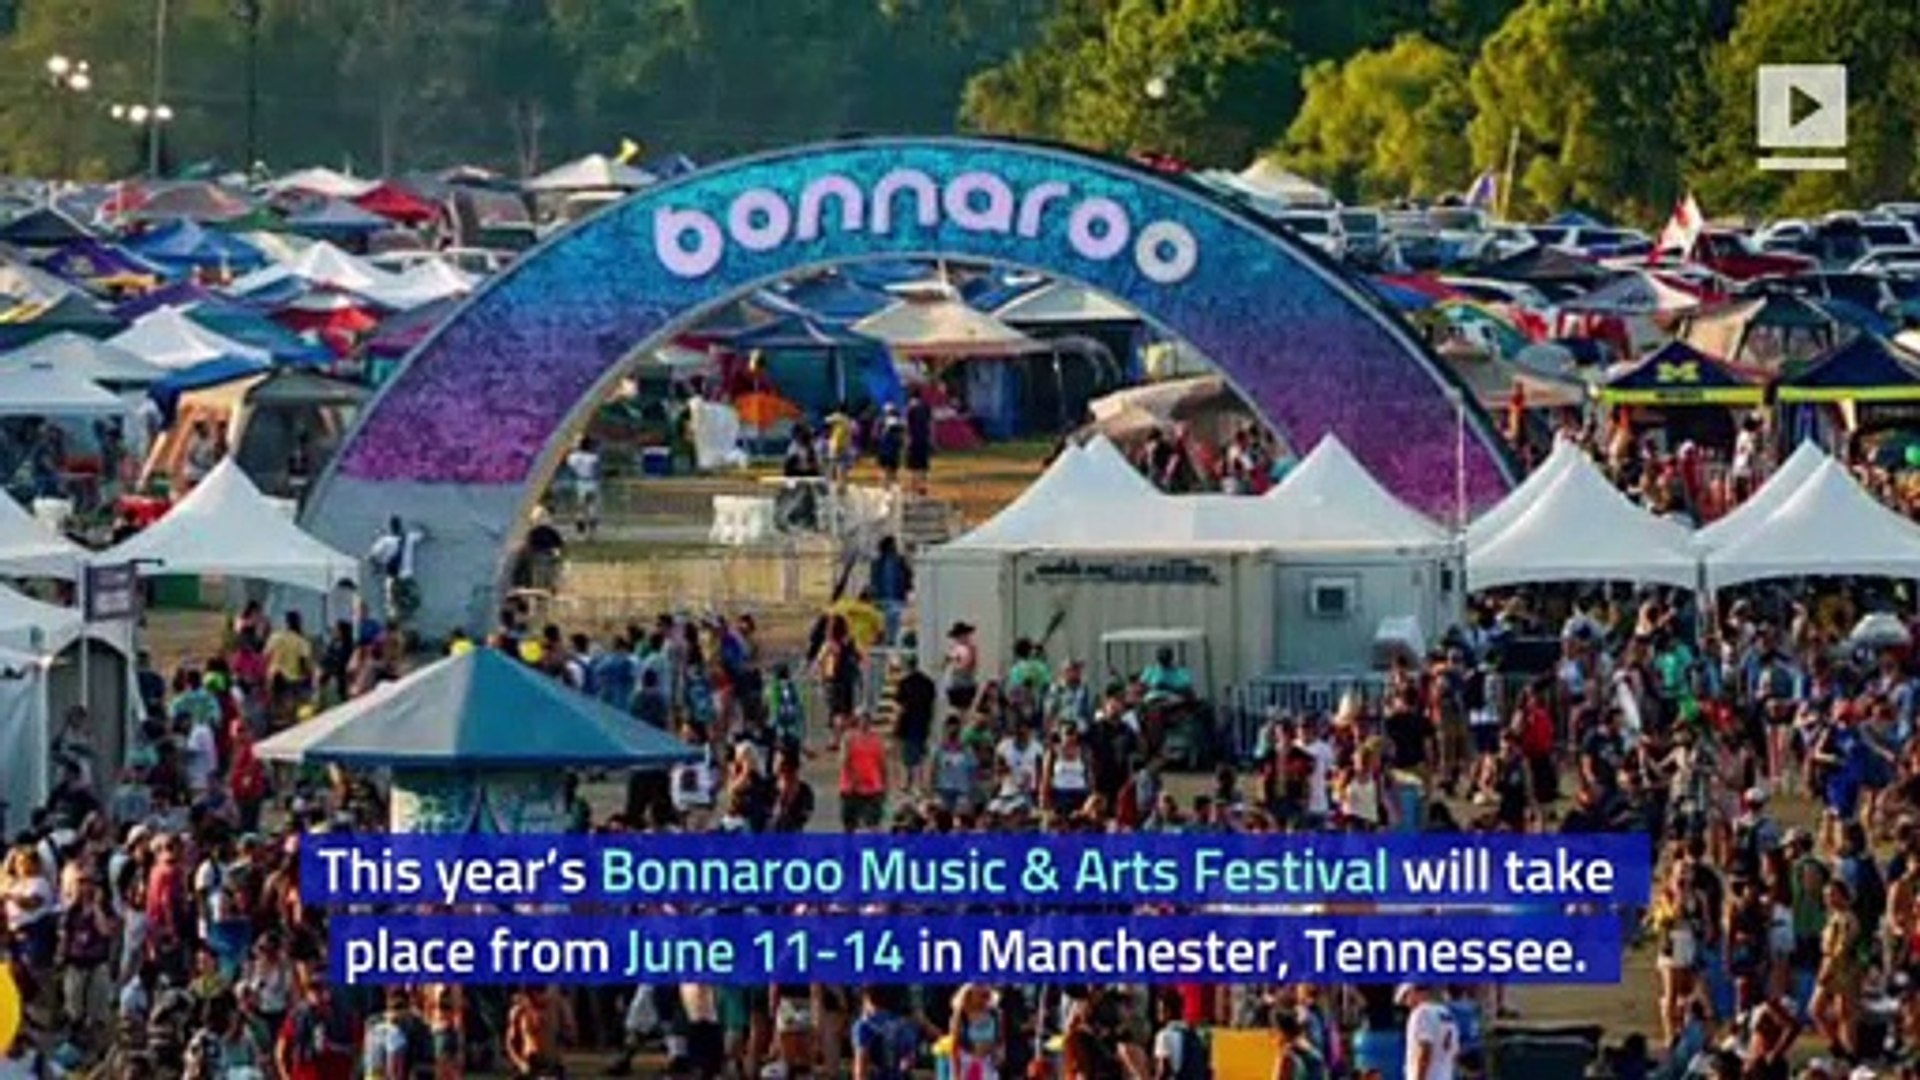 The 2020 Bonnaroo Lineup Is Here